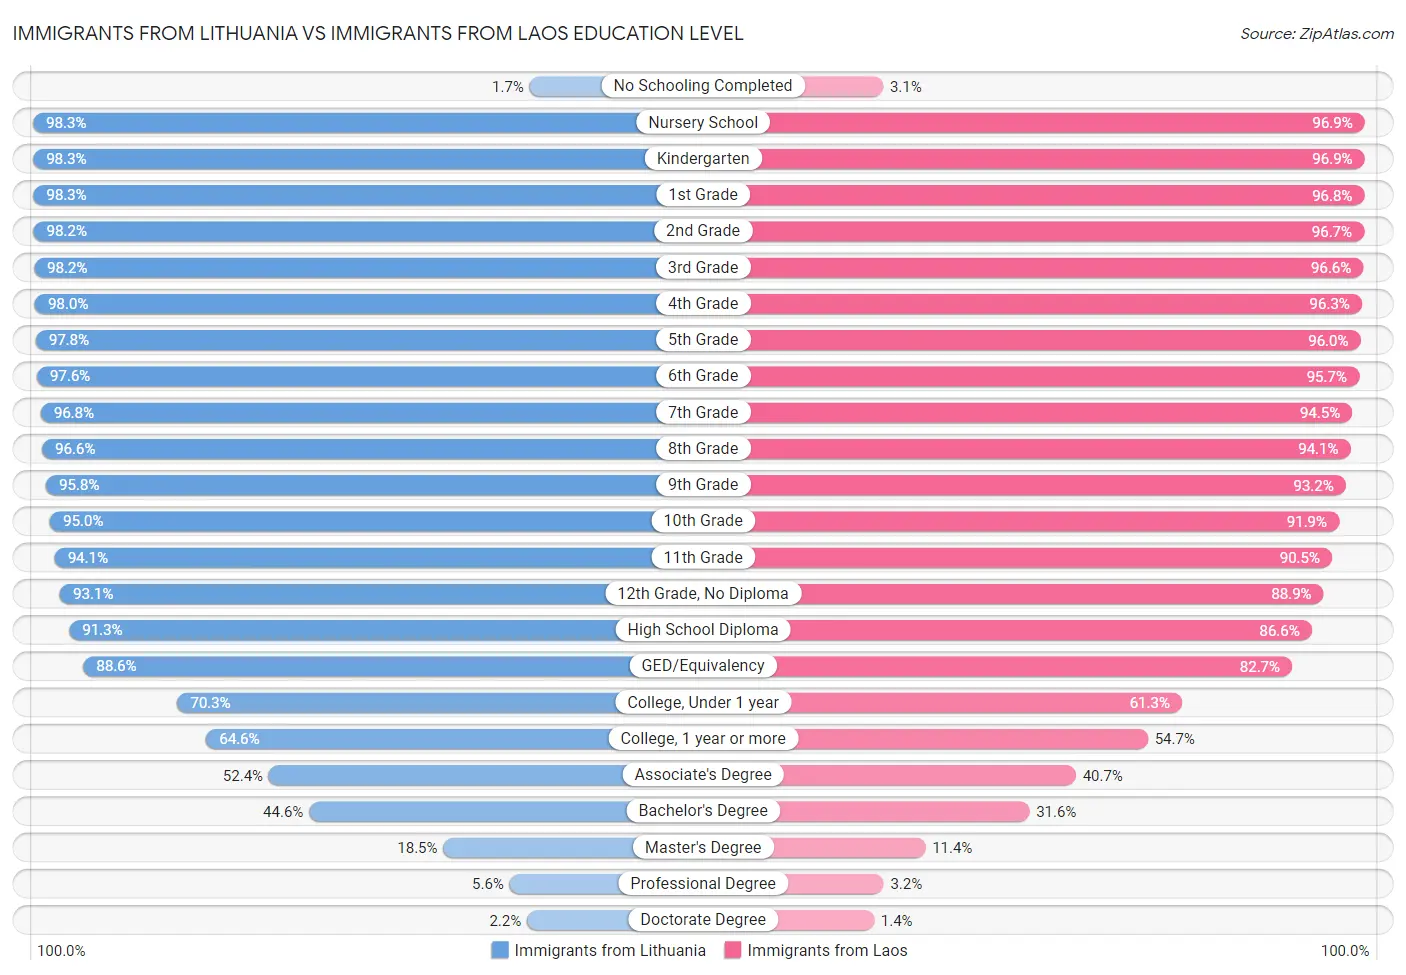 Immigrants from Lithuania vs Immigrants from Laos Education Level